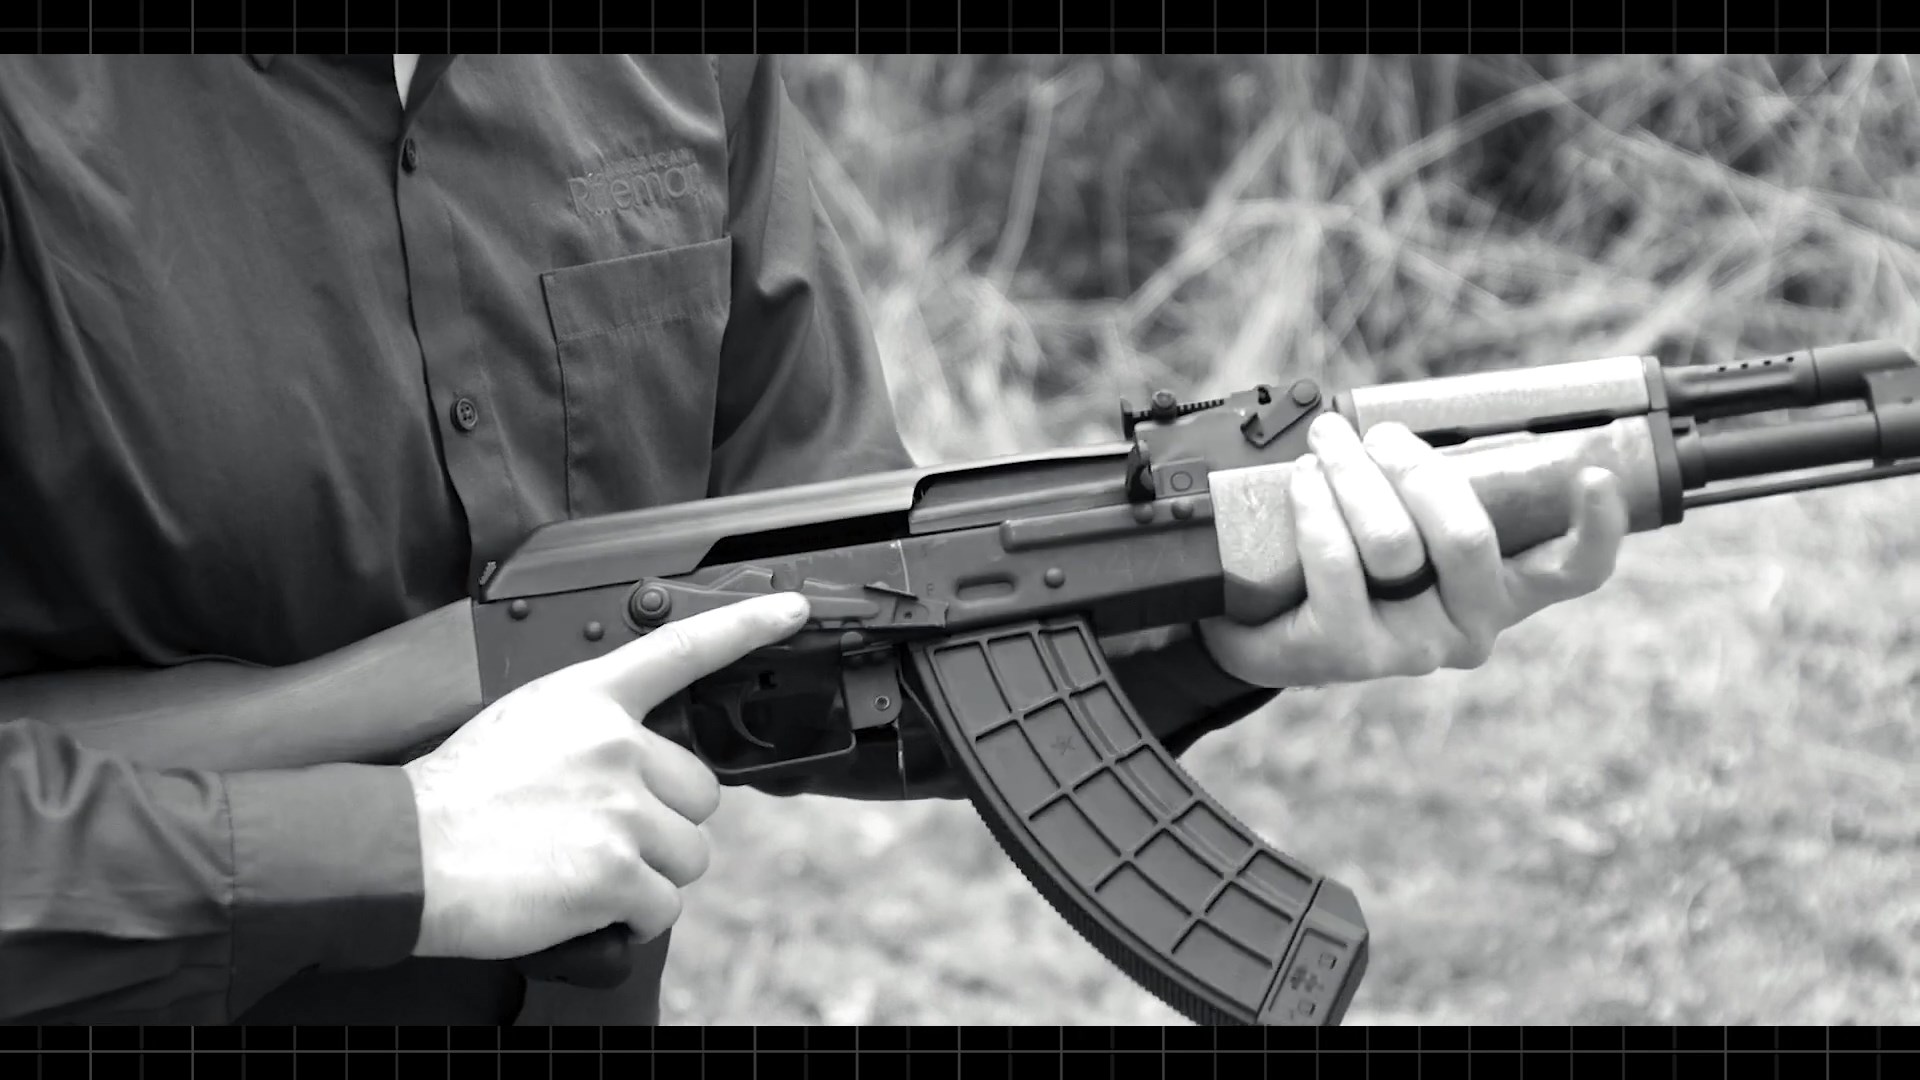 Century Arms BFT47 rifle in hands outdoor shooting black/white image